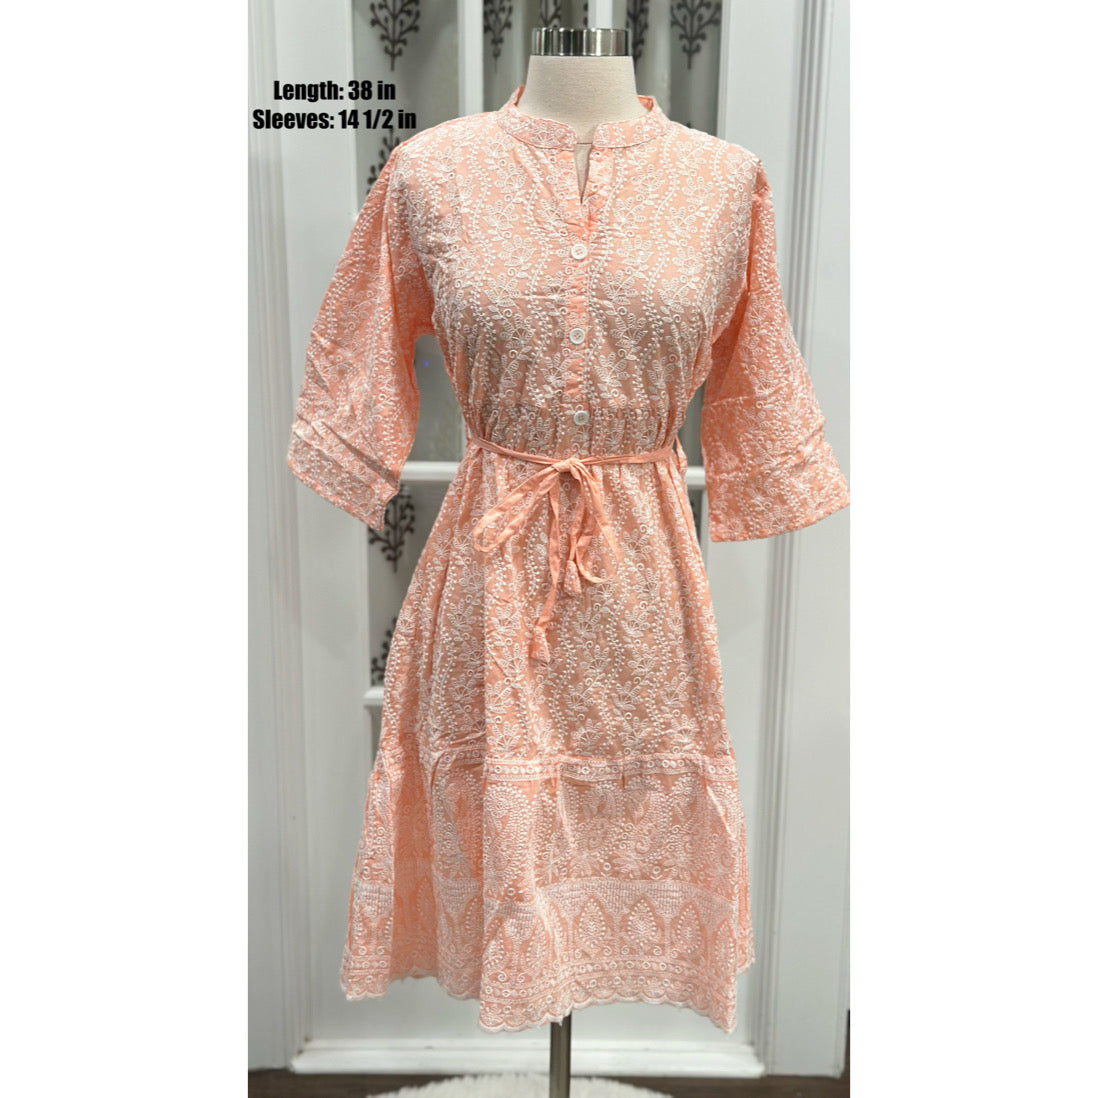 Short Summer Frock in chikankari and sequence in Sky Blue and Peach color